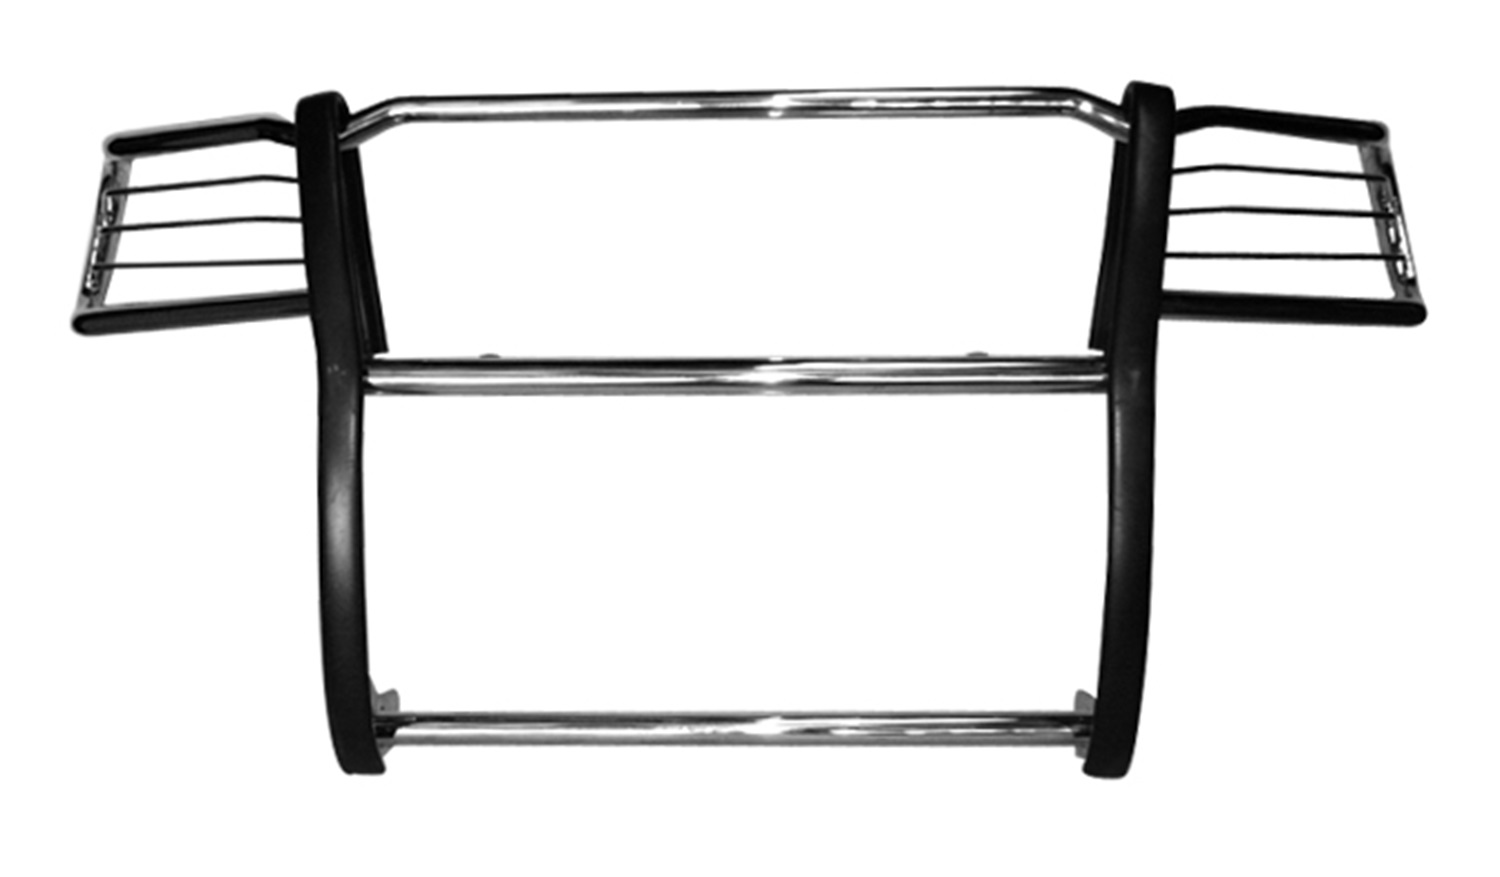 Aries Offroad Aries Offroad 2054-2 The Aries Bar; Grille/Brush Guard Fits 05-14 Tacoma